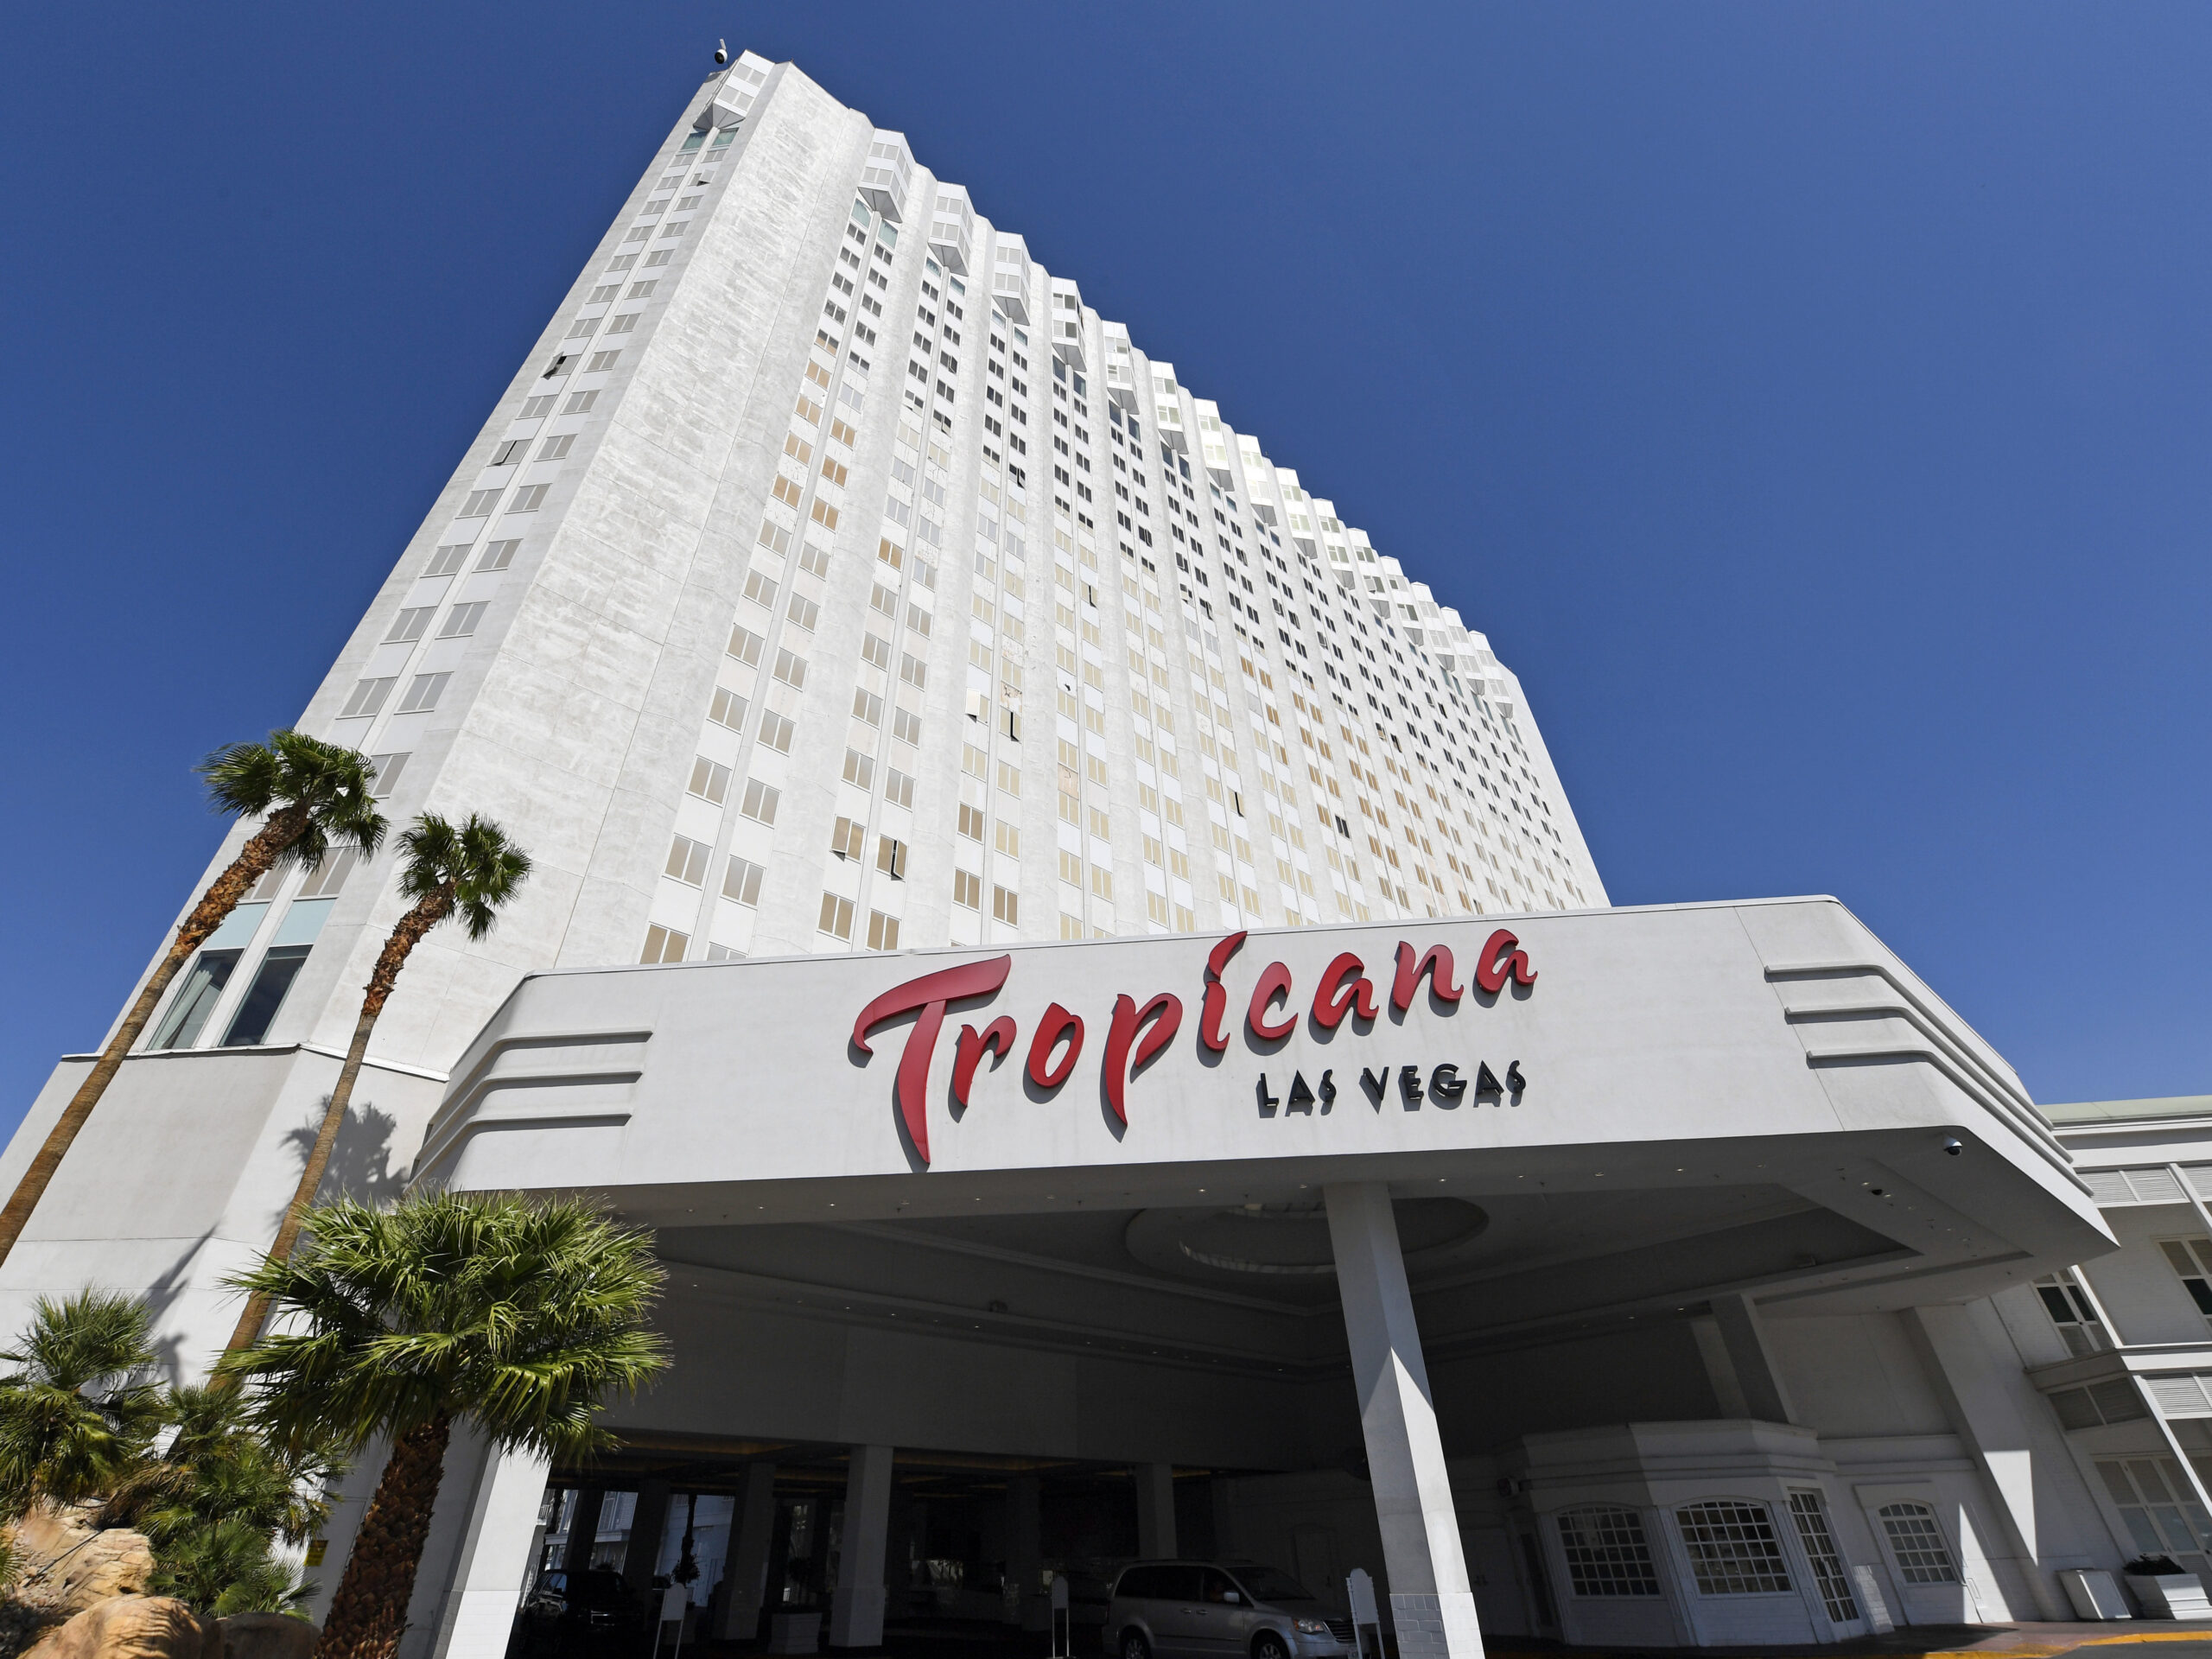 Las Vegas’ famed Tropicana resort will close this week to make way for a new ballpark